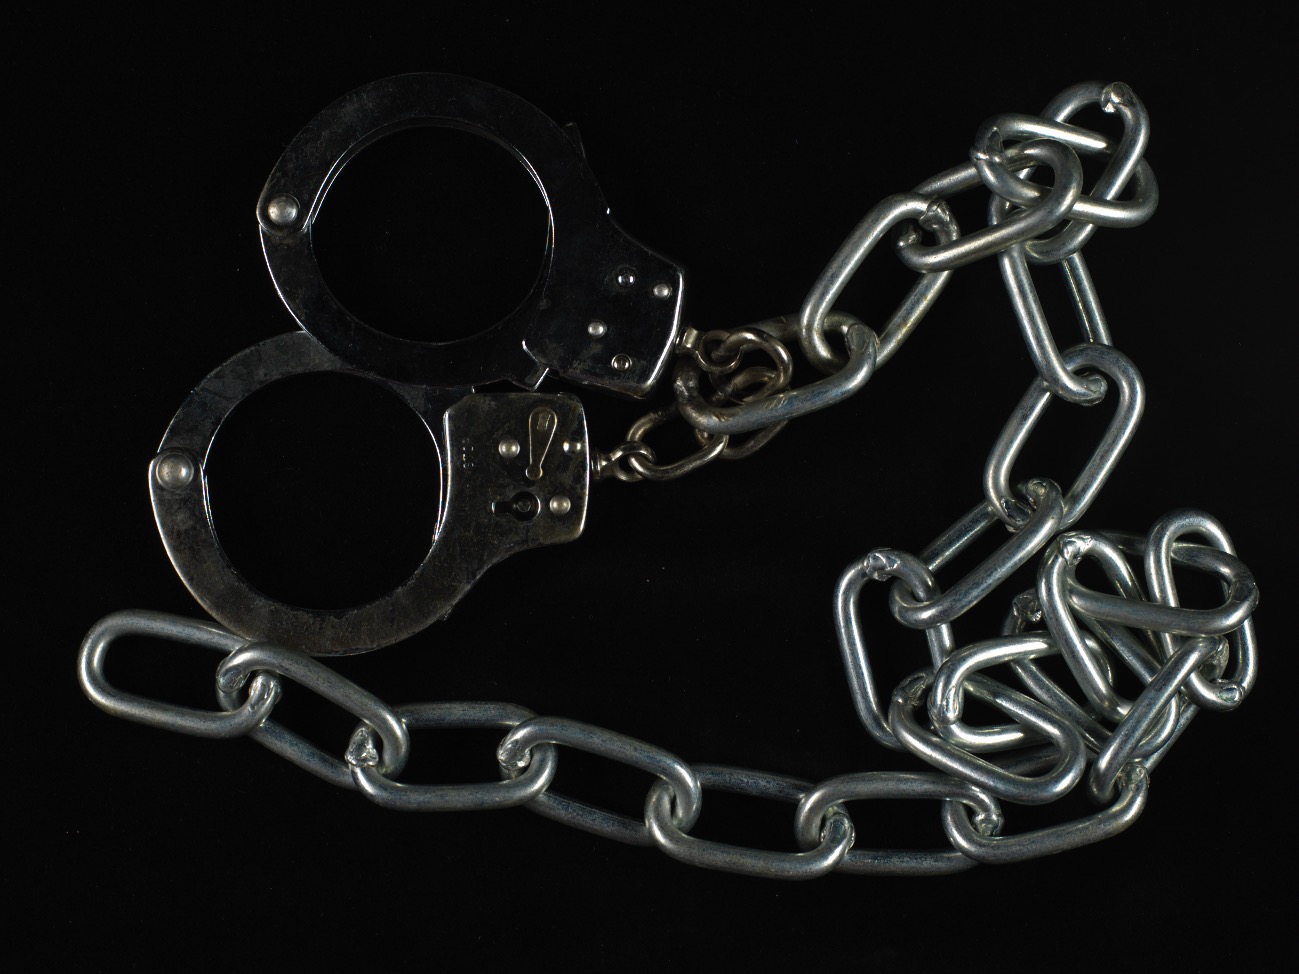 Handcuffs used at Women's Campaign for Soviet Jewry demonstrations